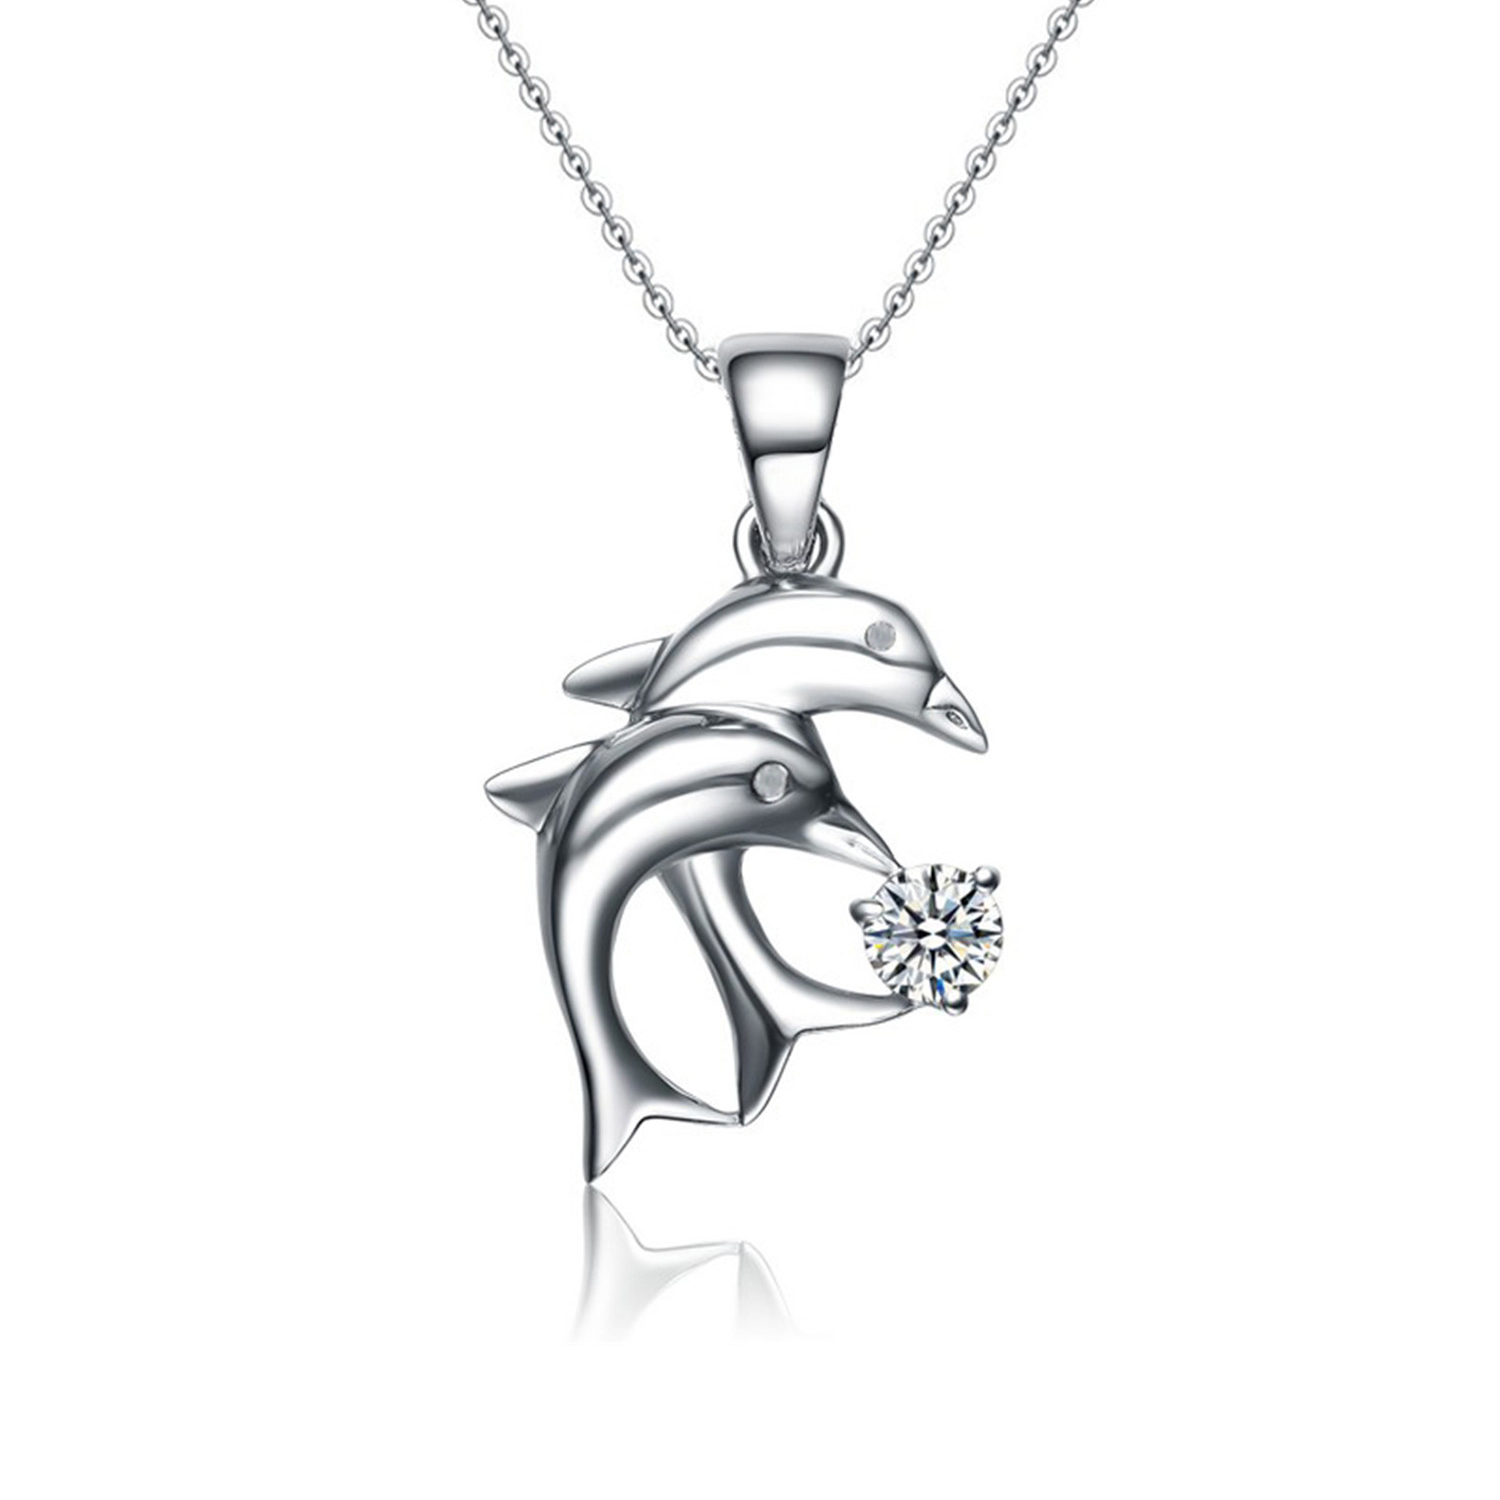 Customize Fashion 925 Silver Two Dolphins Pendant Necklace Cross Chain Necklaces for women gift